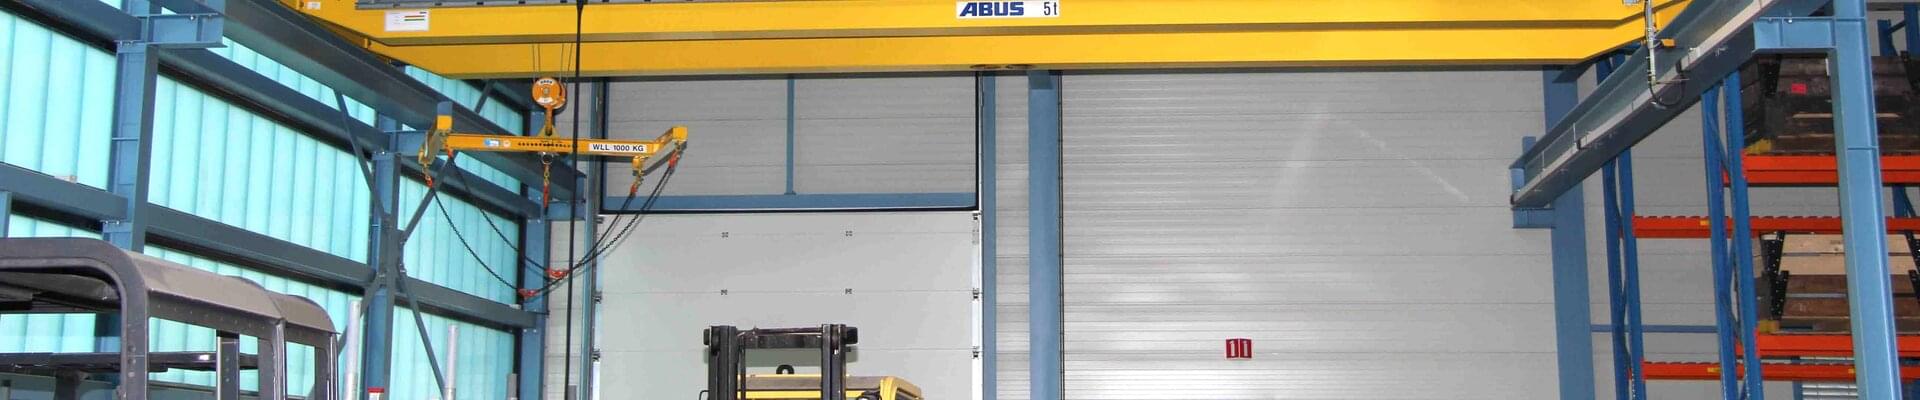 ABUS crane with a load capacity of 5 t in the company NedTrain Componenten in the Netherlands